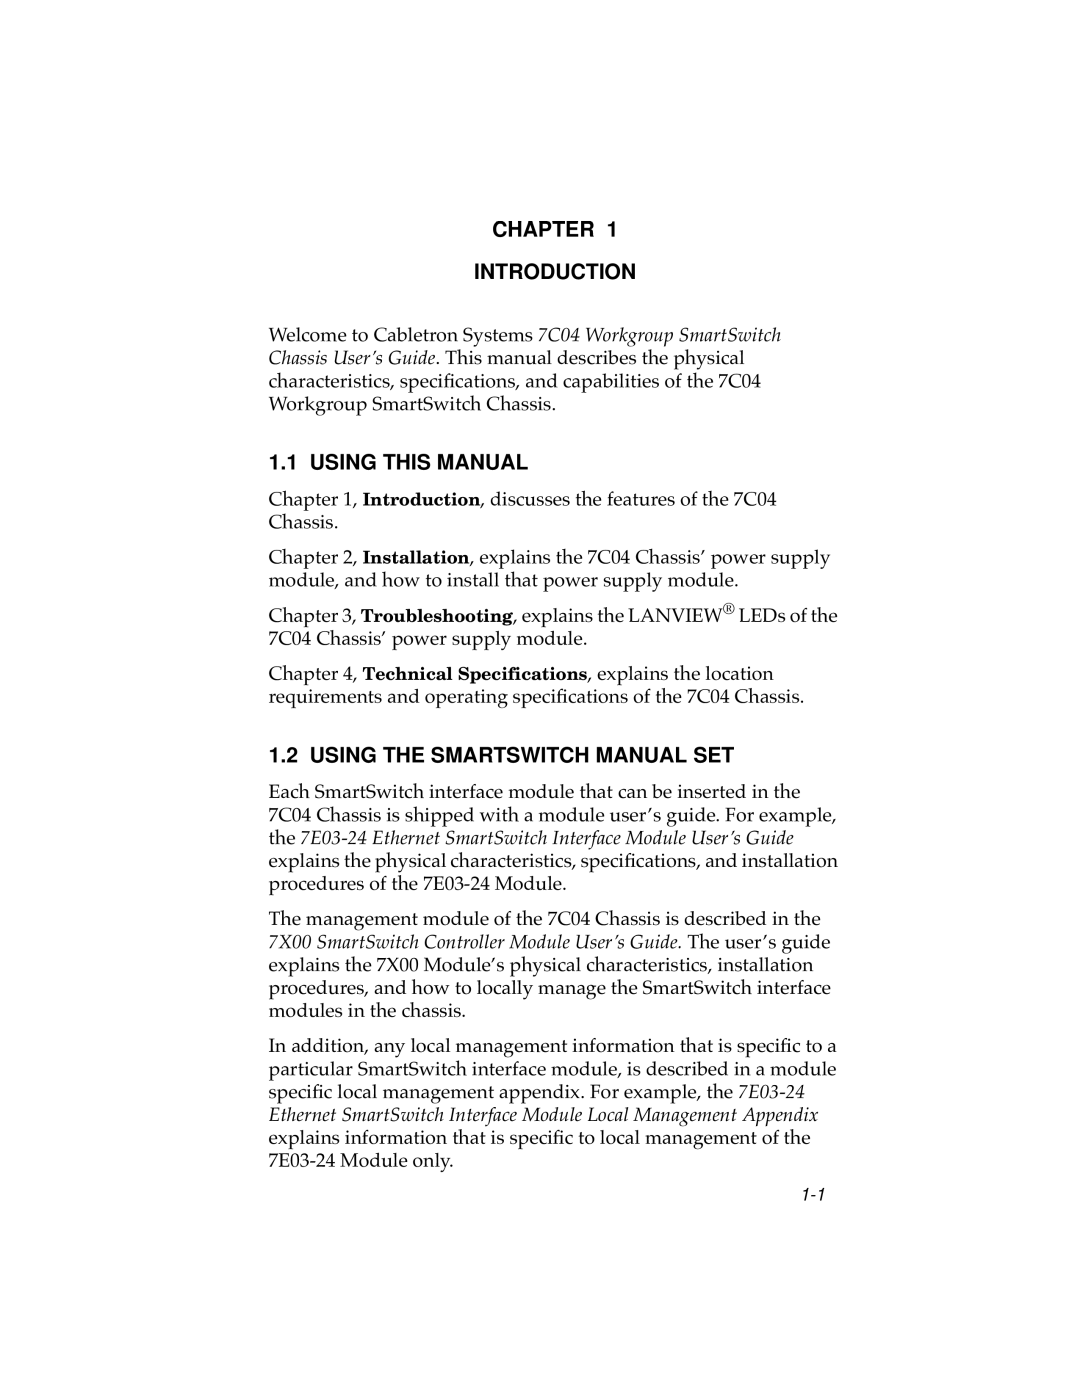 Cabletron Systems 7C04 Workgroup manual Chapter Introduction, Using This Manual, Using The Smartswitch Manual Set 